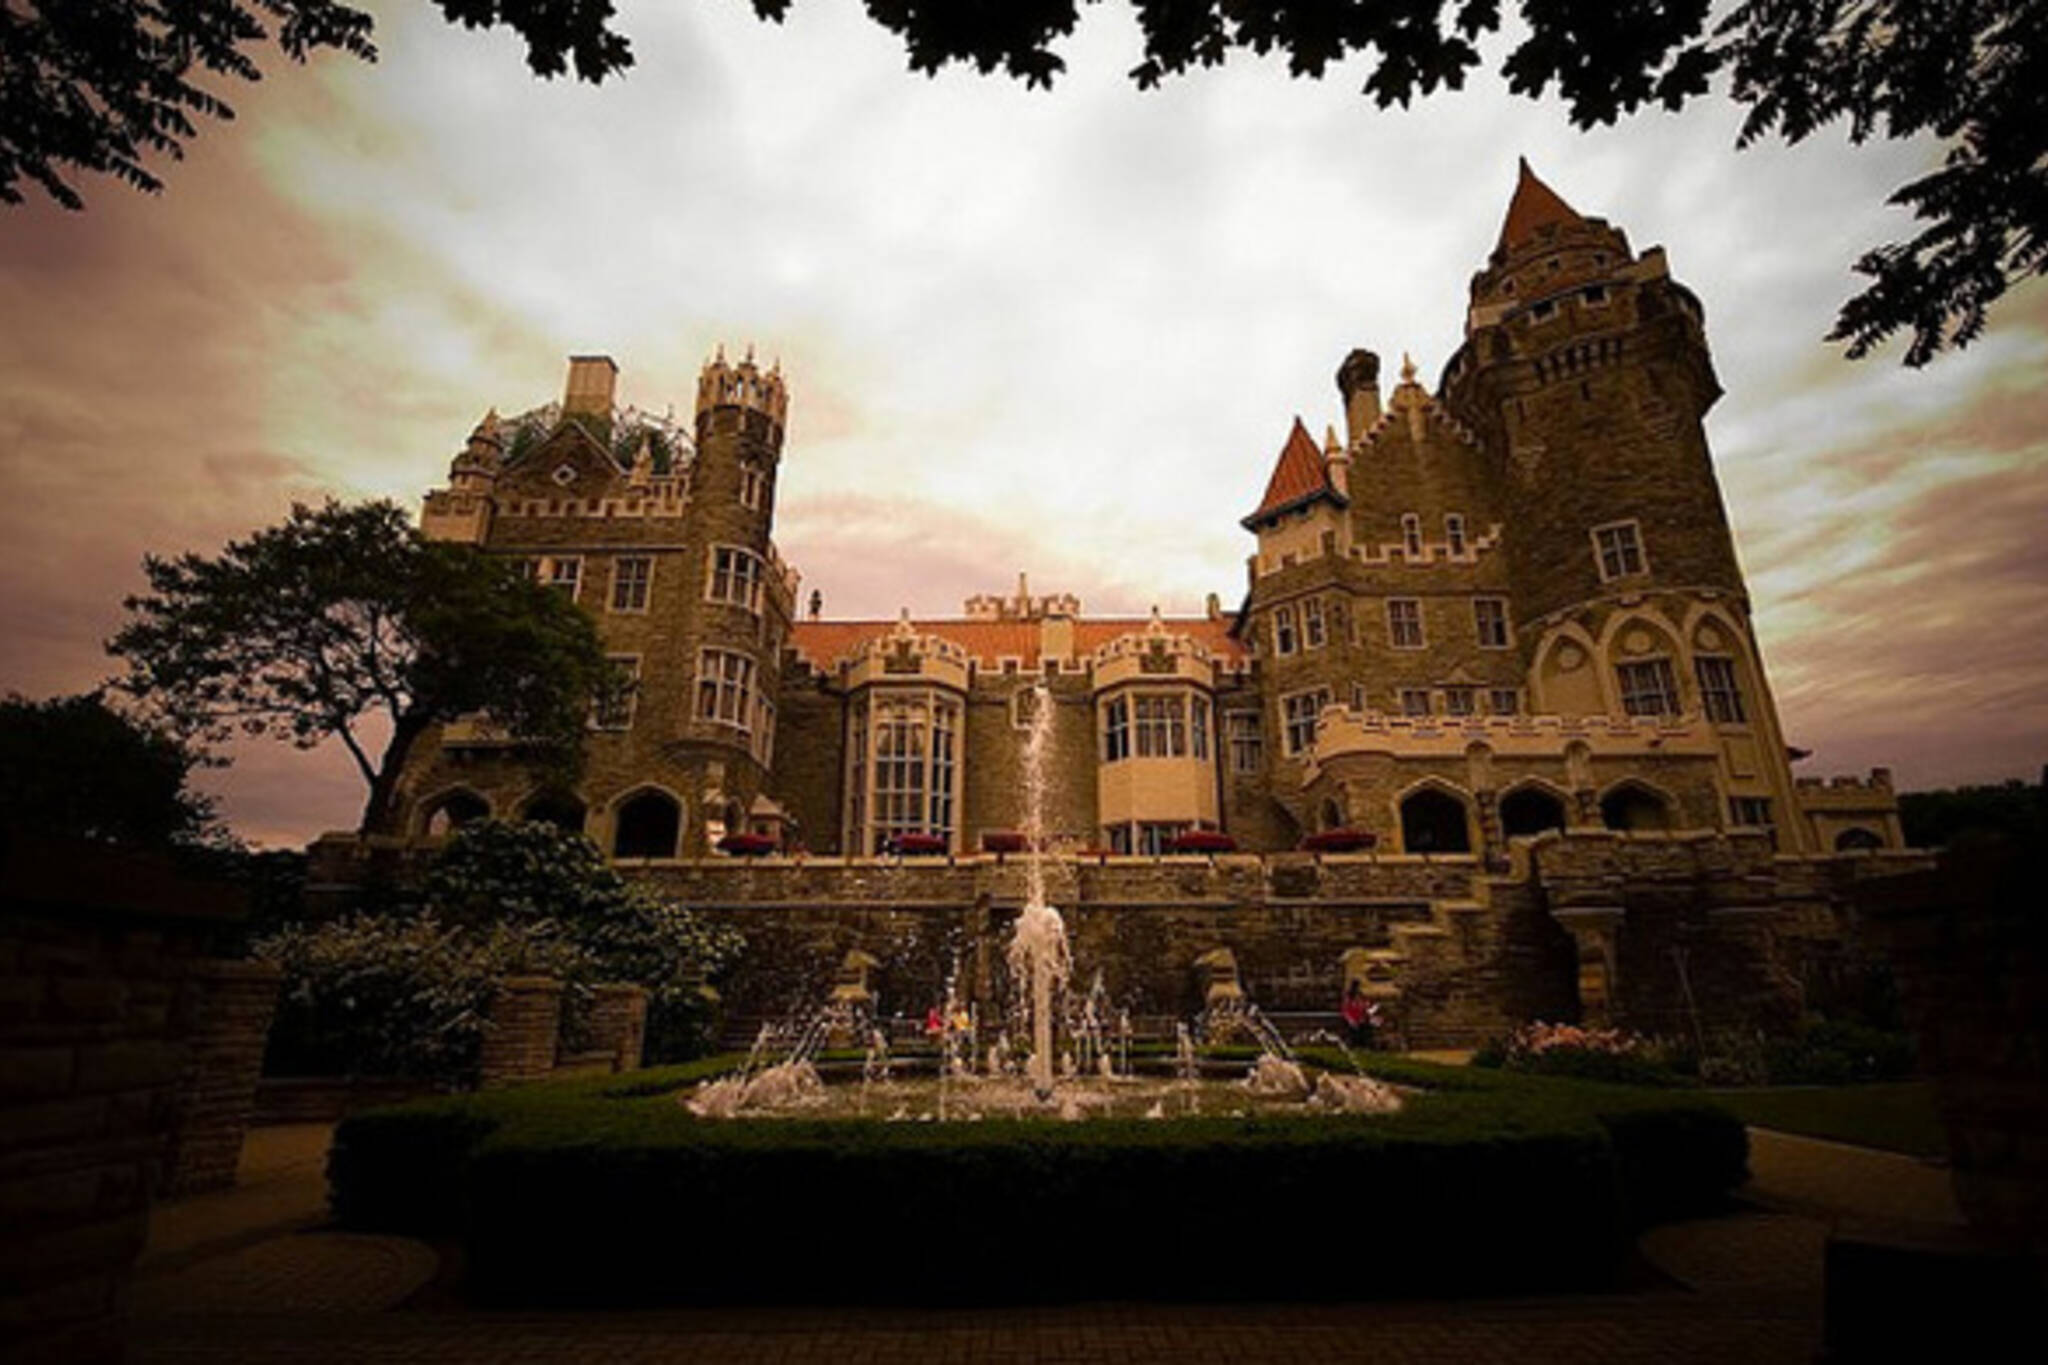 Now You Can Play An Escape Room Game At Casa Loma